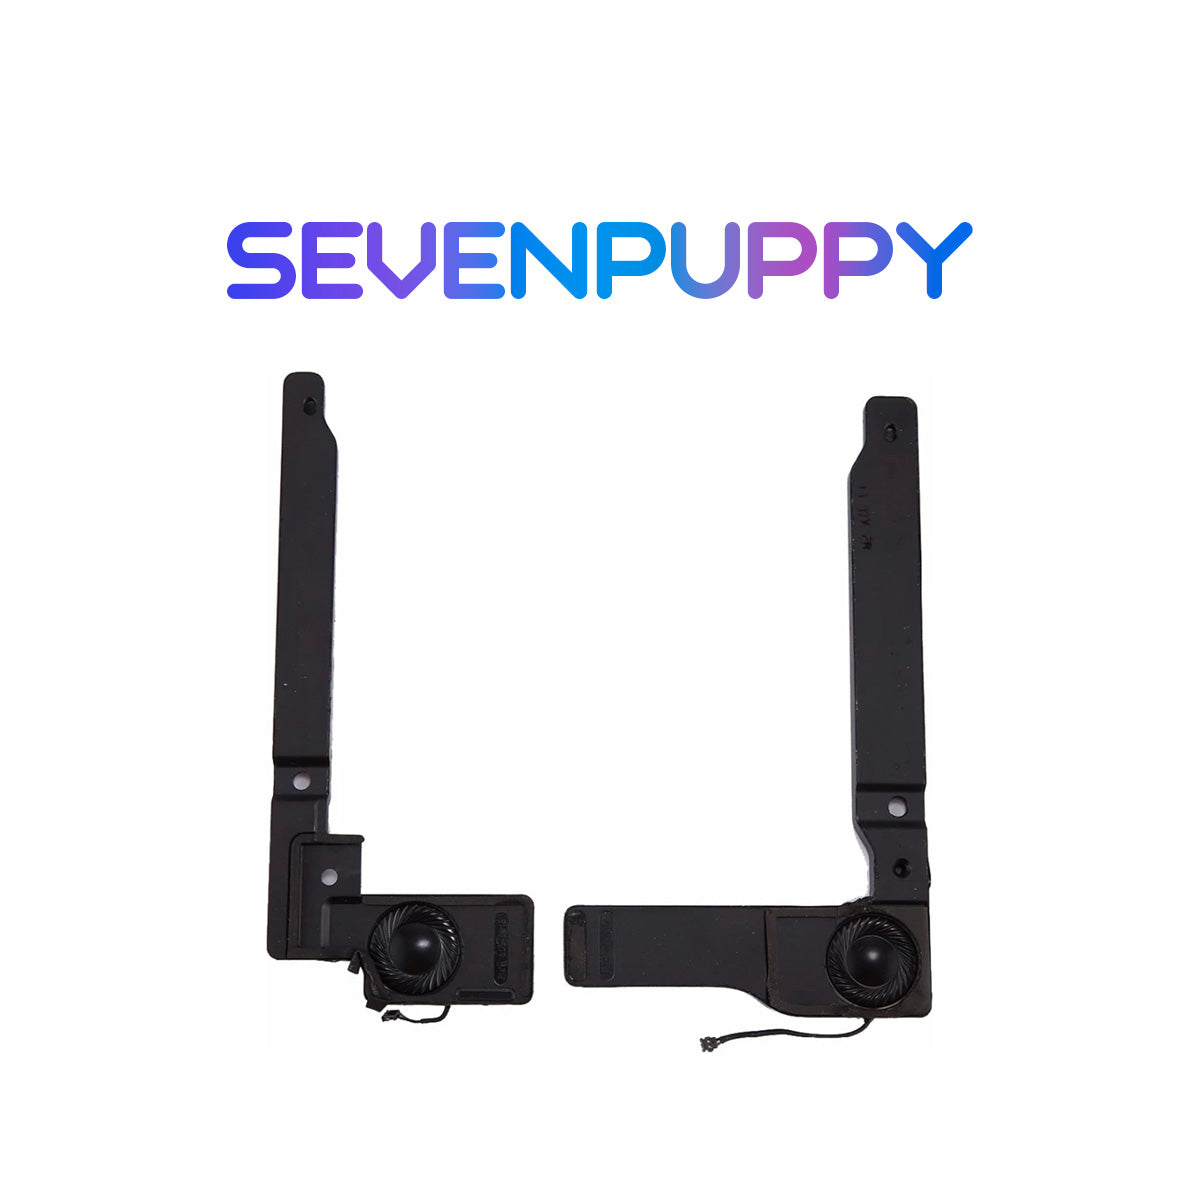 SEVEN PUPPY Brand NEW Left and Right Speaker Set Pair For Macbook  Air 13" A1369 A1466 2011-2017 Year Internal Speaker